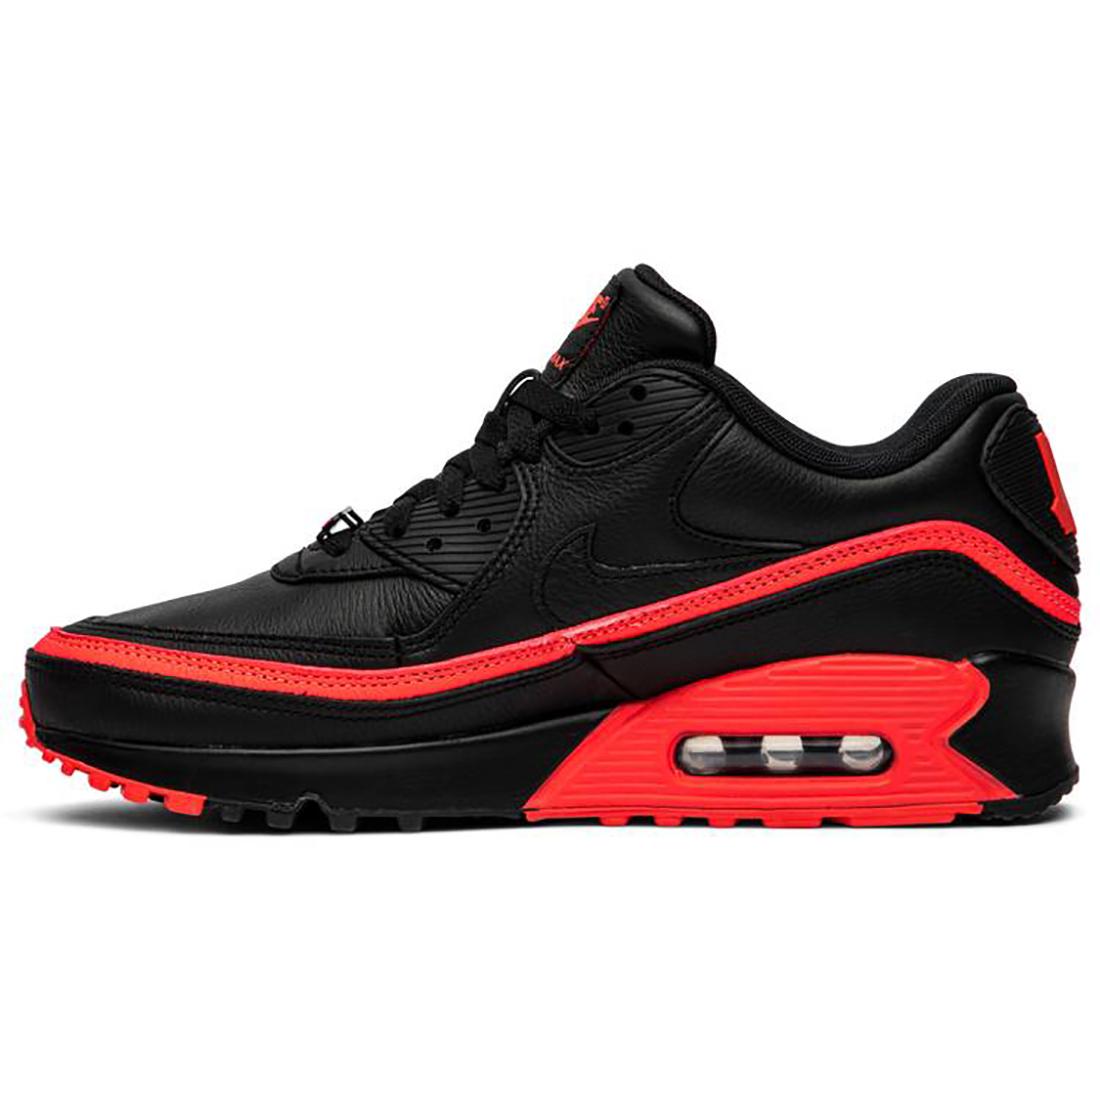 Undefeated X Air Max 90 Black Solar Red